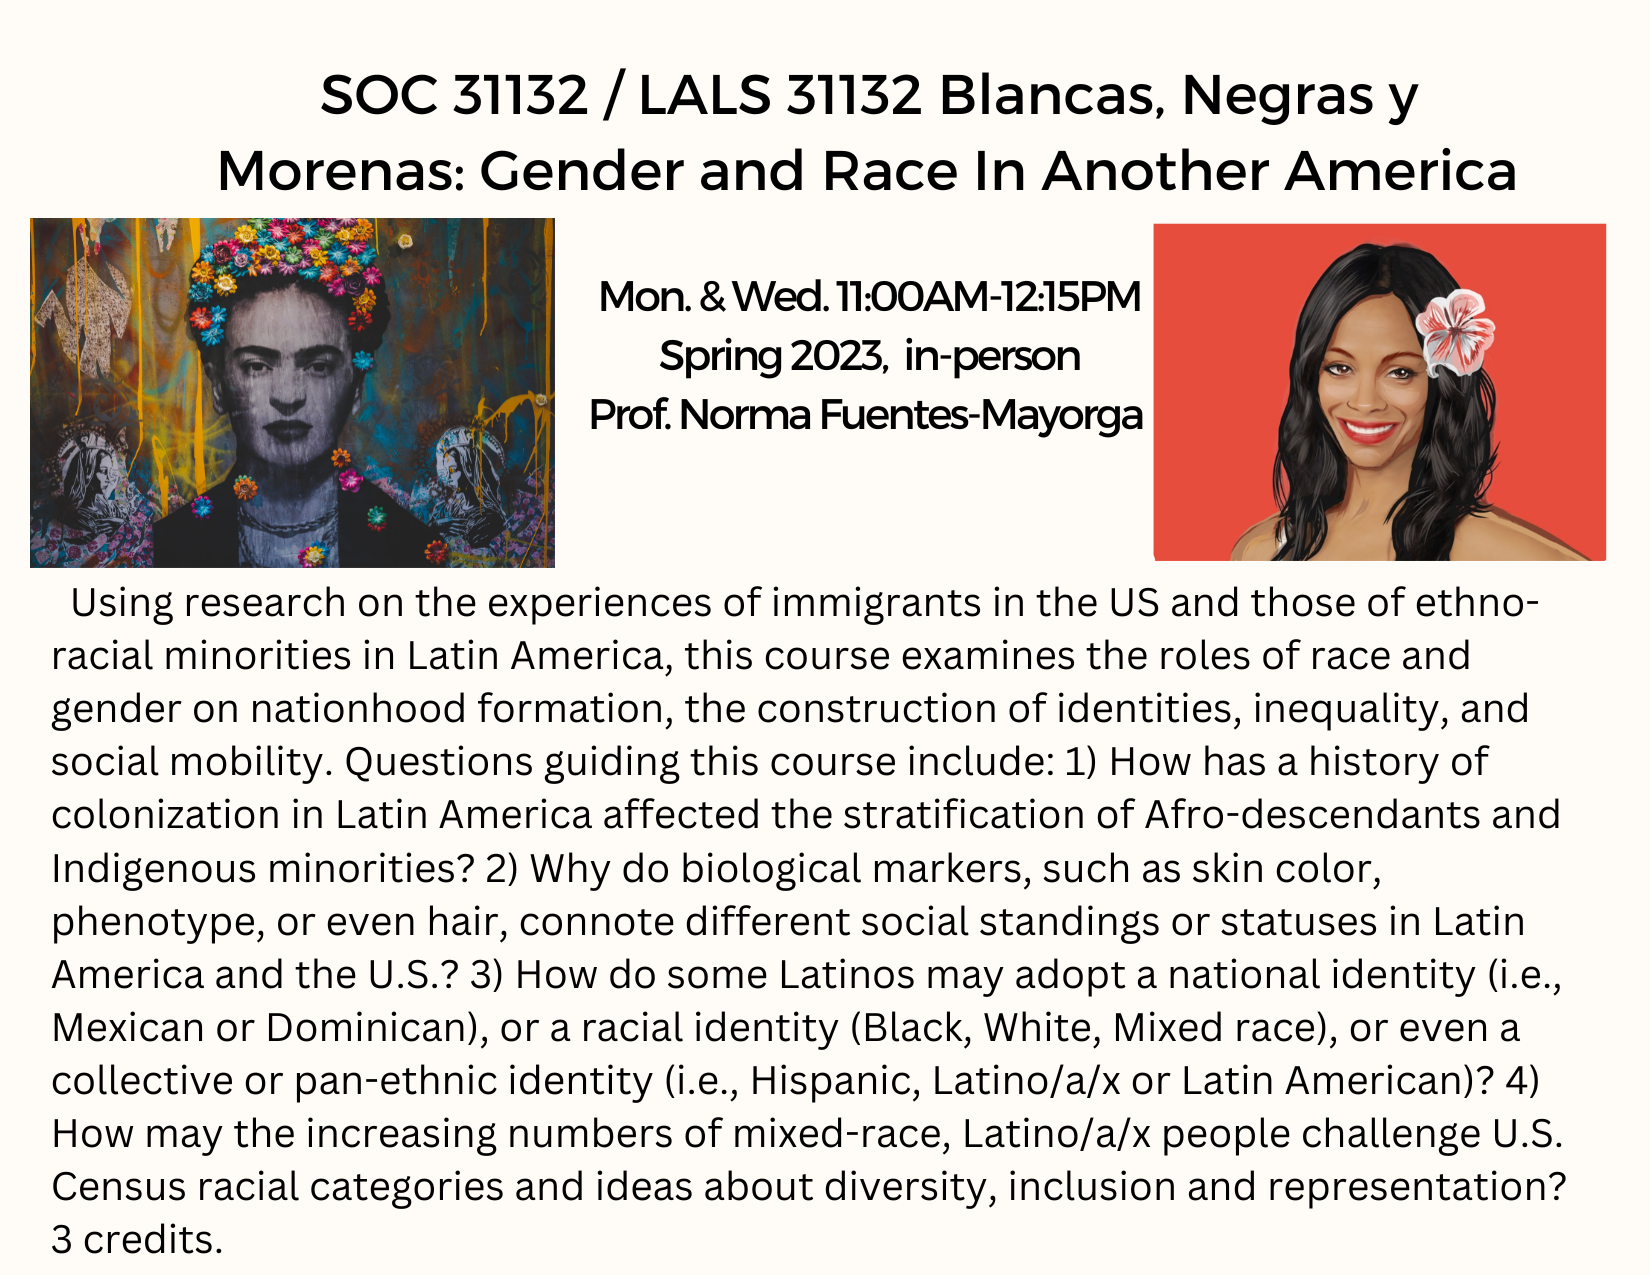 Blancas, Negras Y Morenas: Gender and Race In Another America Spring 2023 Course